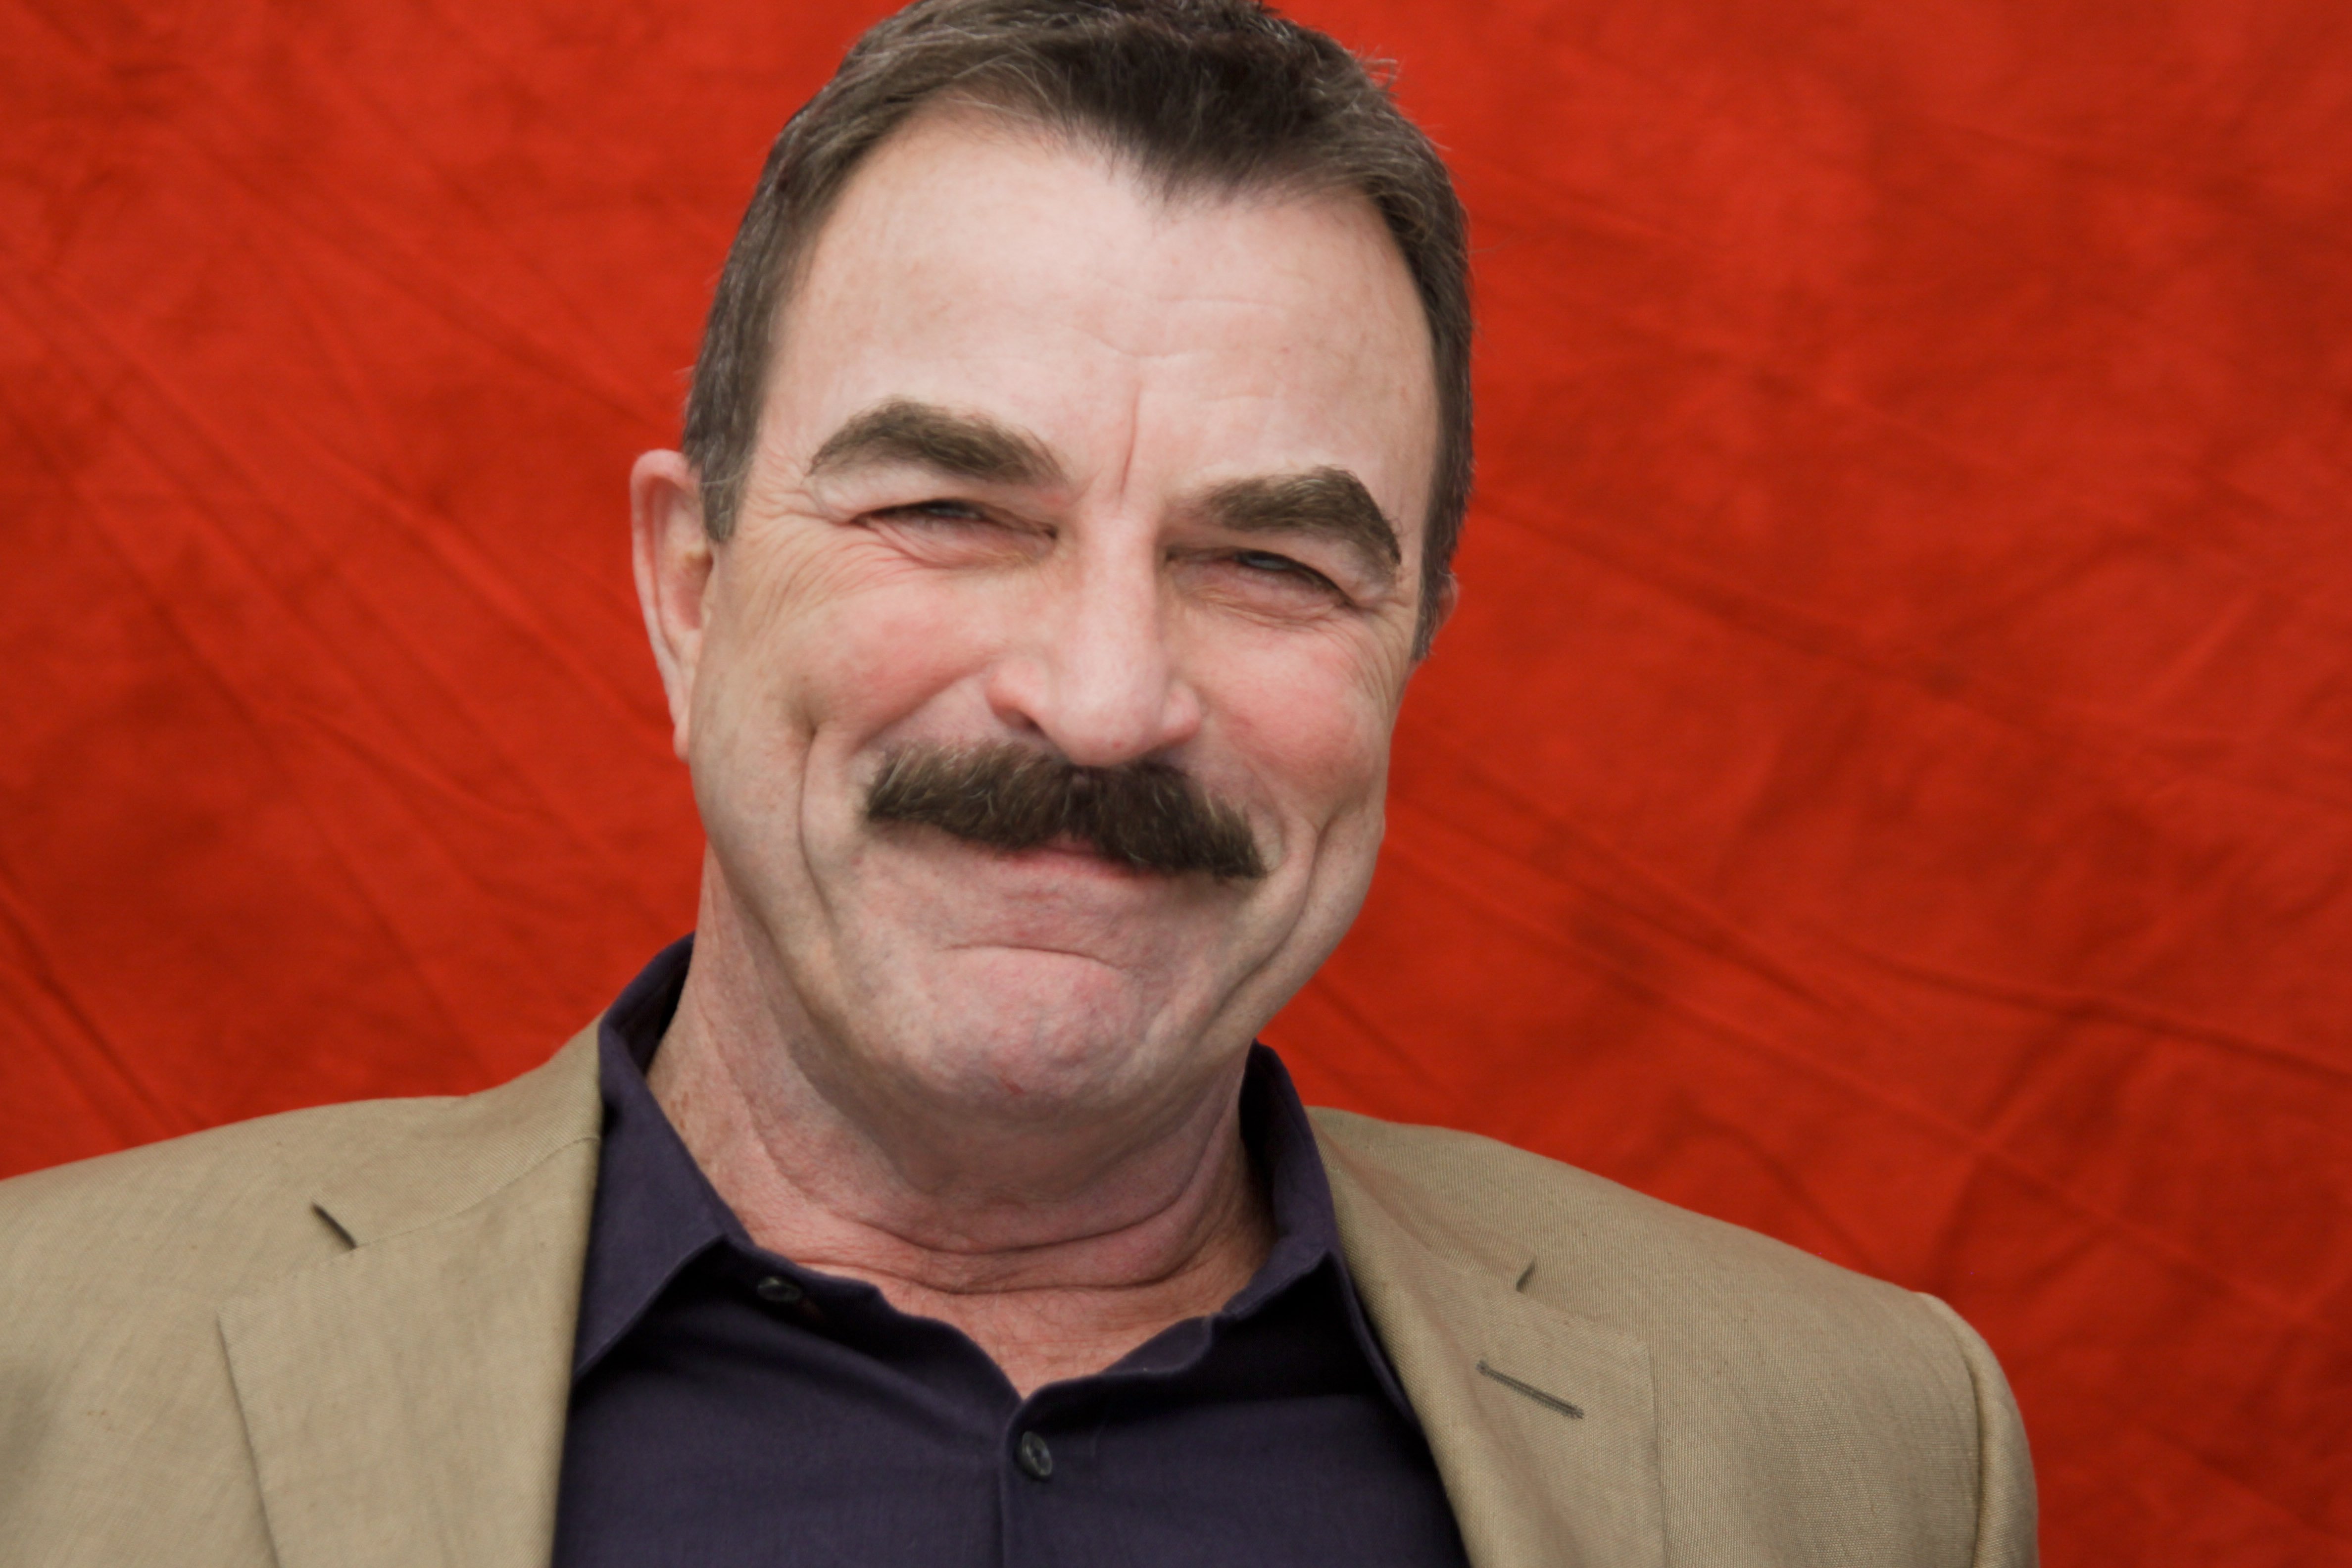 Tom Selleck poses for a photo during a portrait session in West Hollywood, California on August 16, 2010. | Photo: GetttyImages